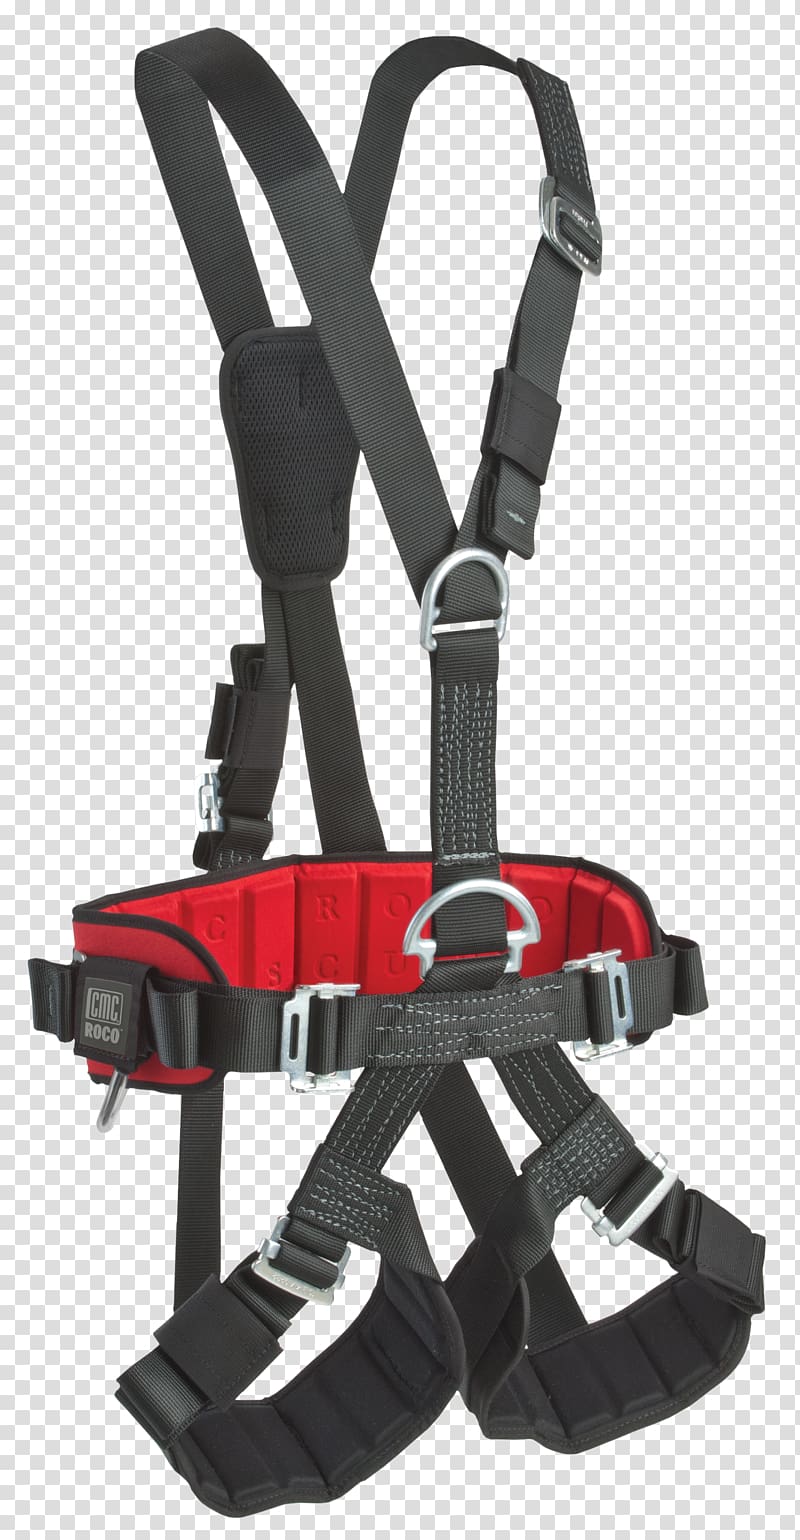 Climbing Harnesses Rope rescue Safety harness Rope access, harness transparent background PNG clipart